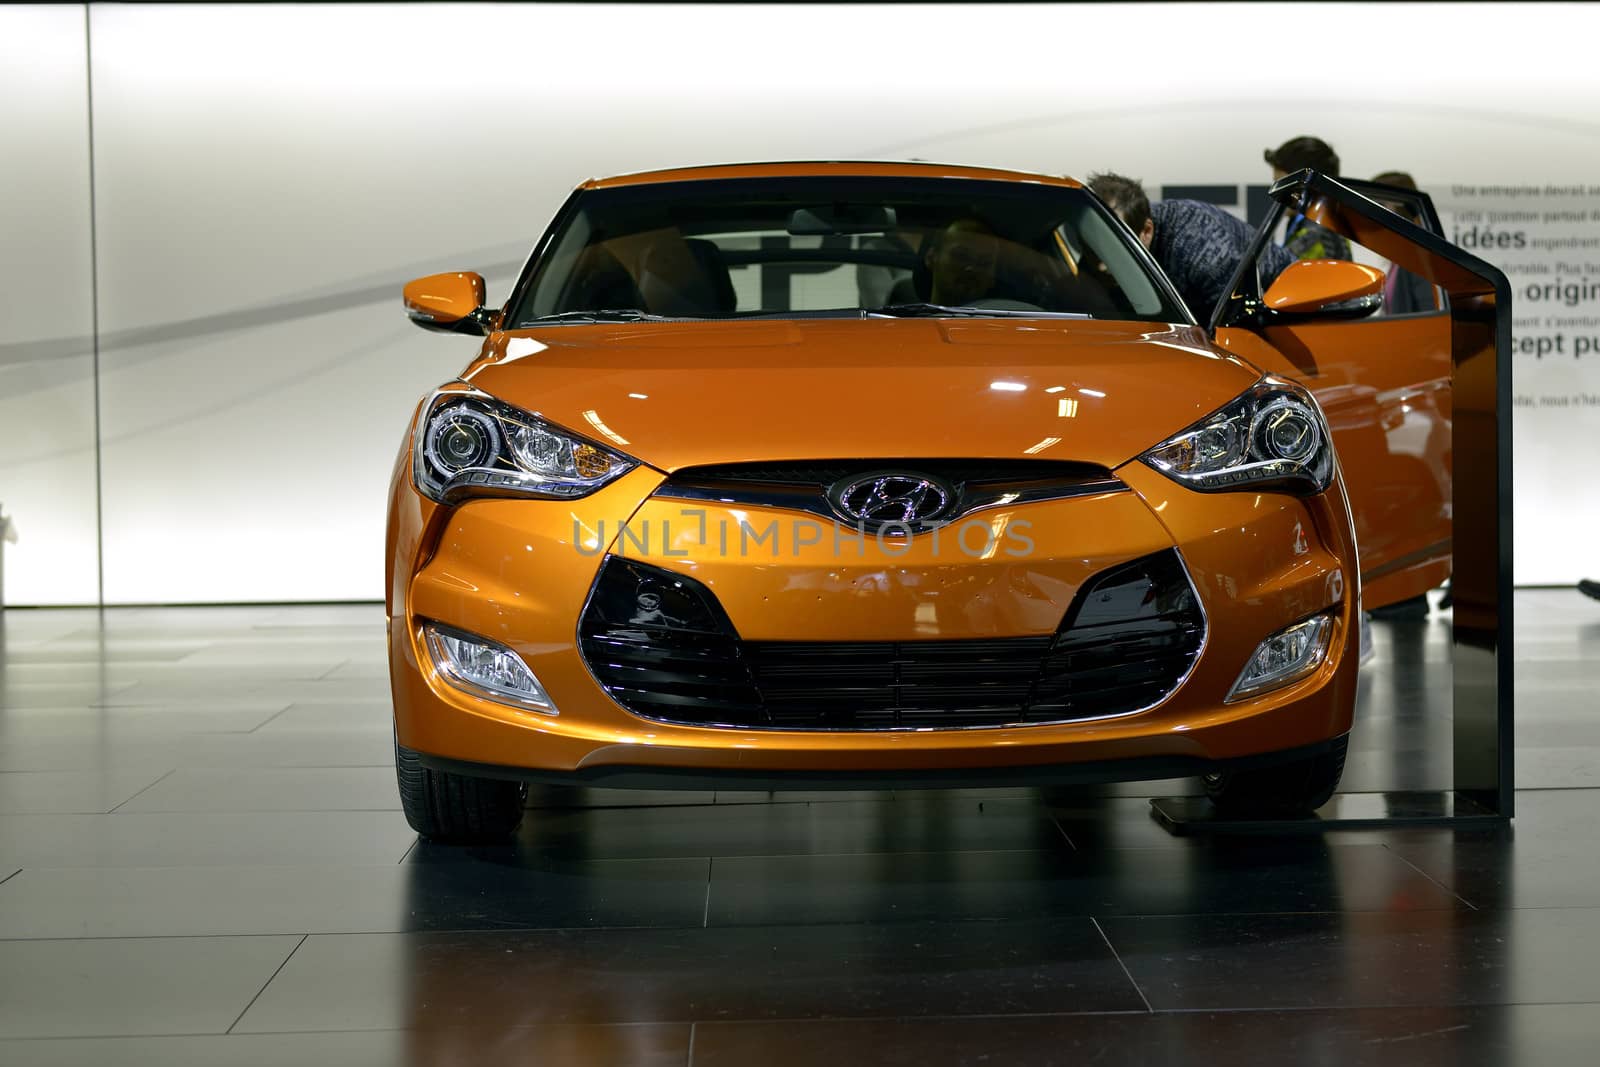 New Hyundai Veloster shown at The 2014 Montreal International Auto Show  at the Palais des Congres de Montreal 46th Edition